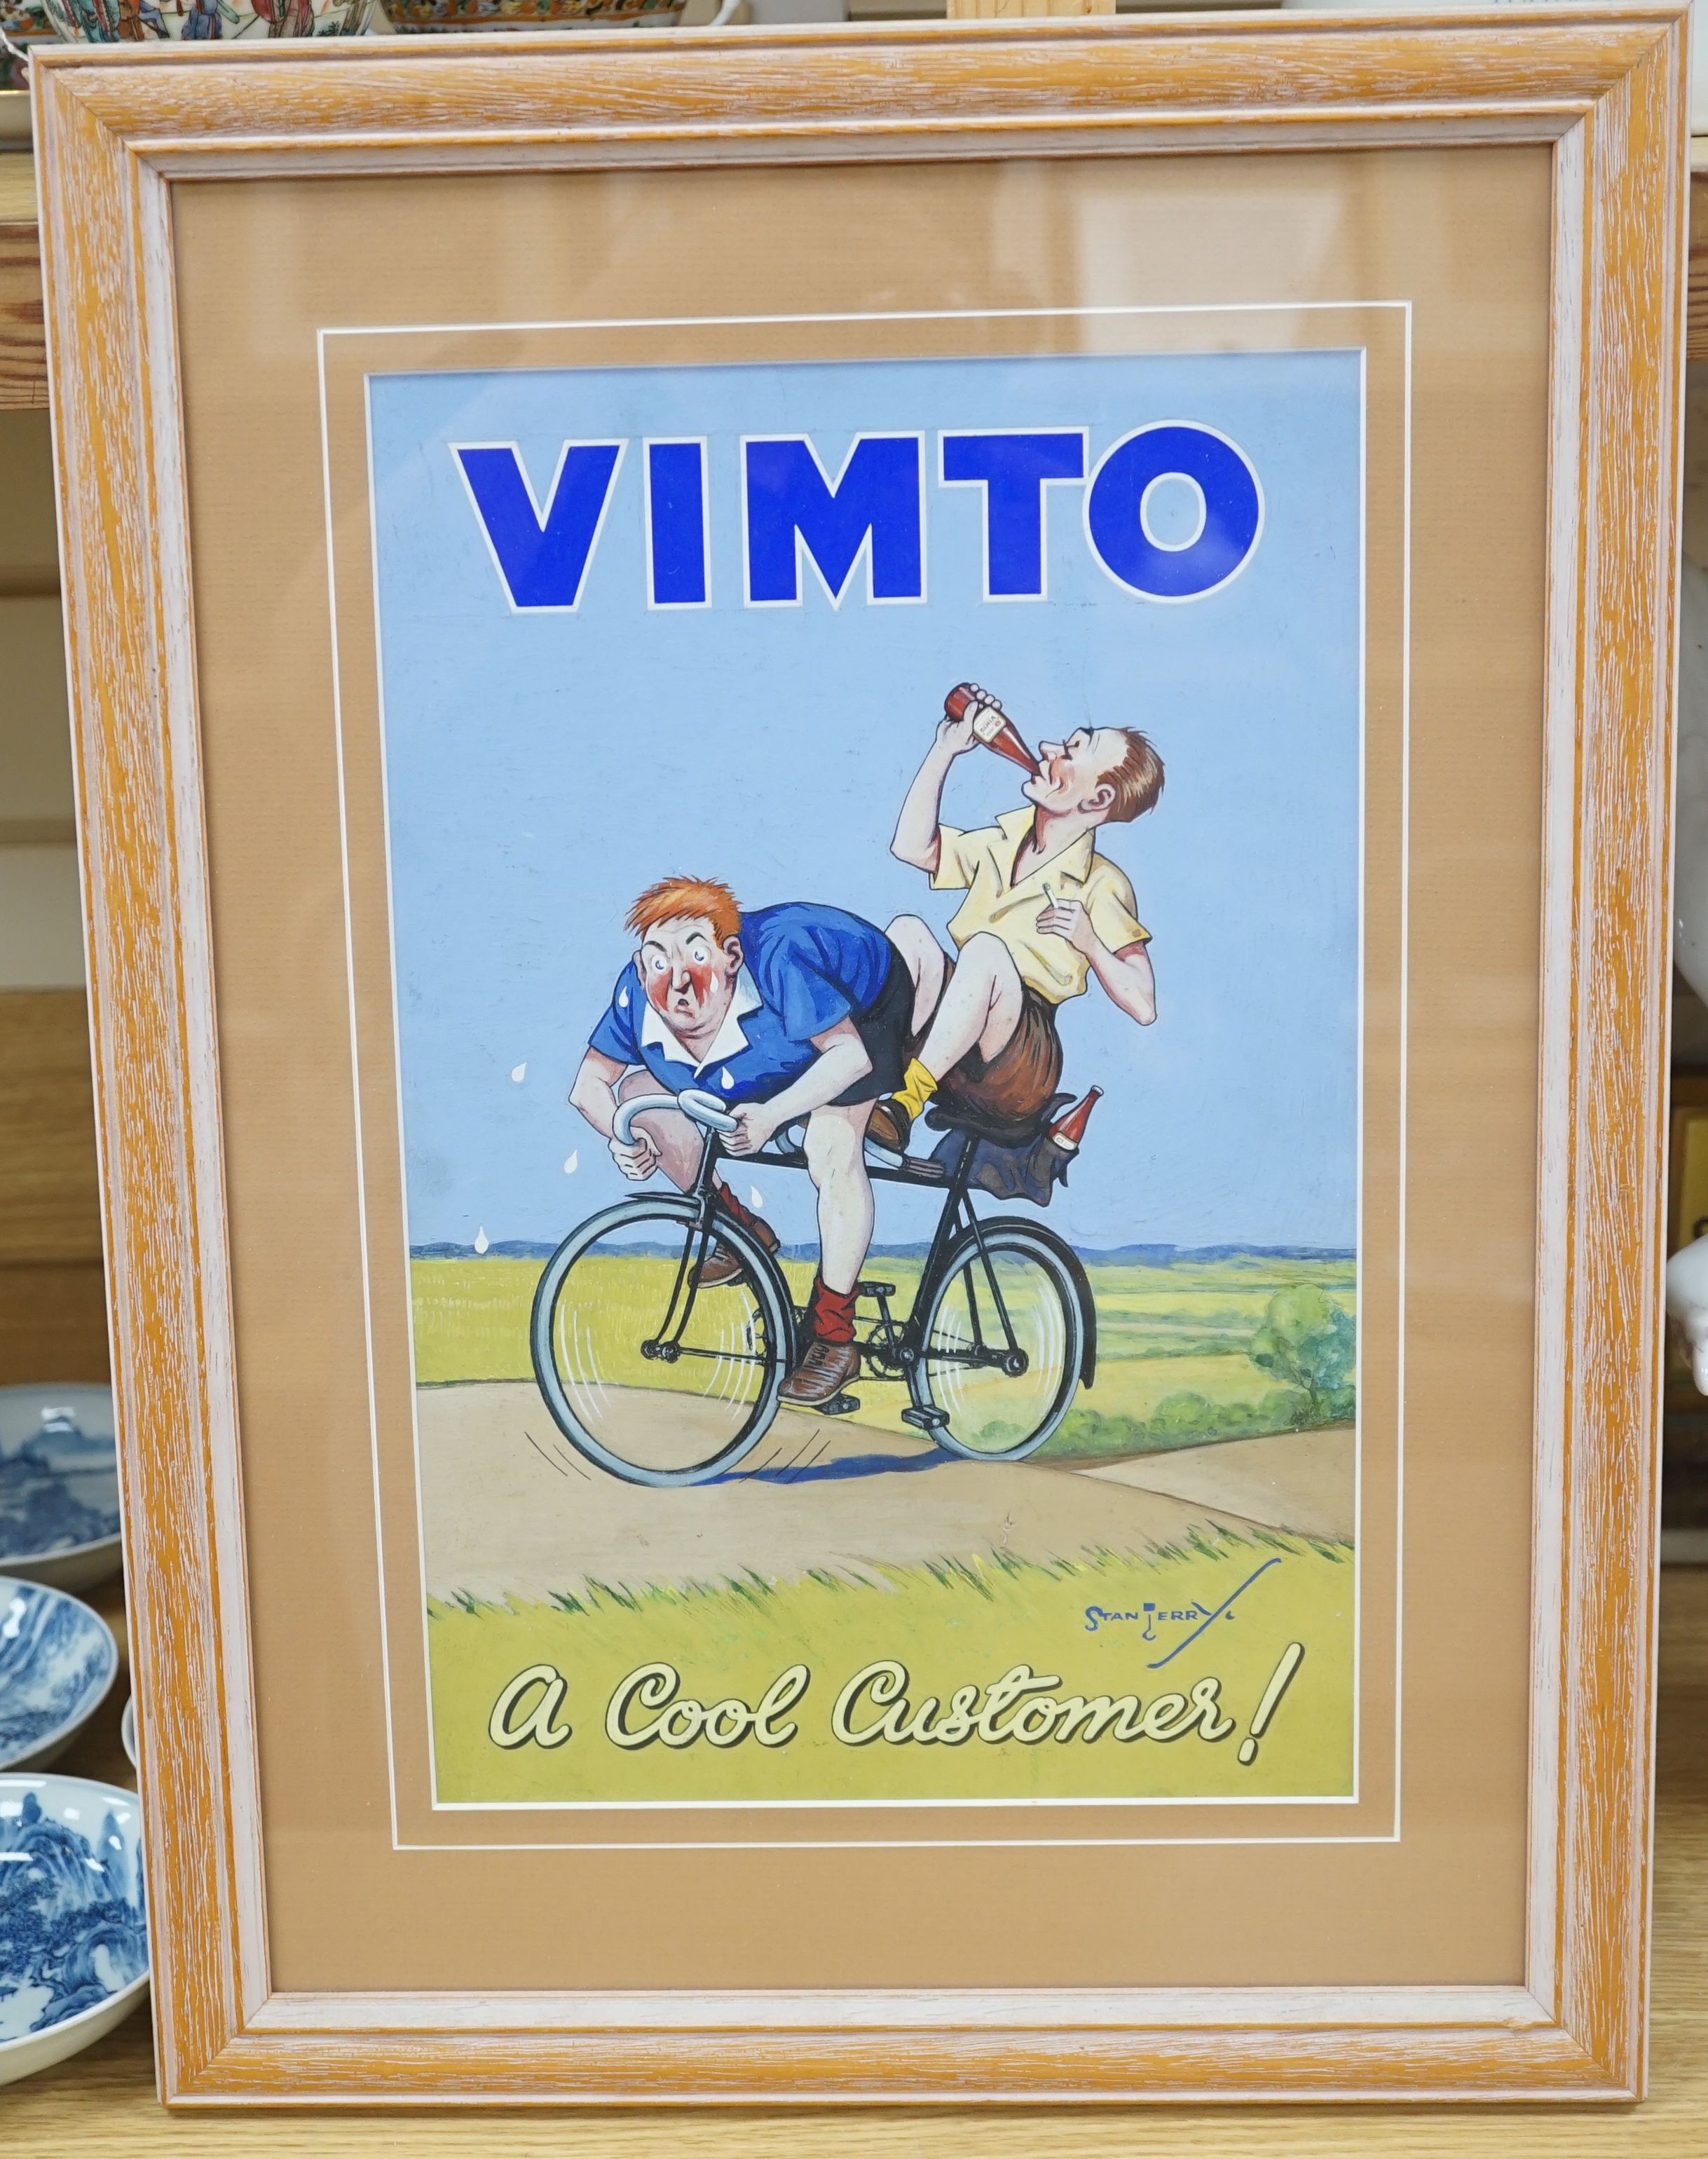 Original artwork for Vimto advertisement by Punch cartoonist Stan Terry (1890-1950), signed, c.1930, 35 cm X 23cm